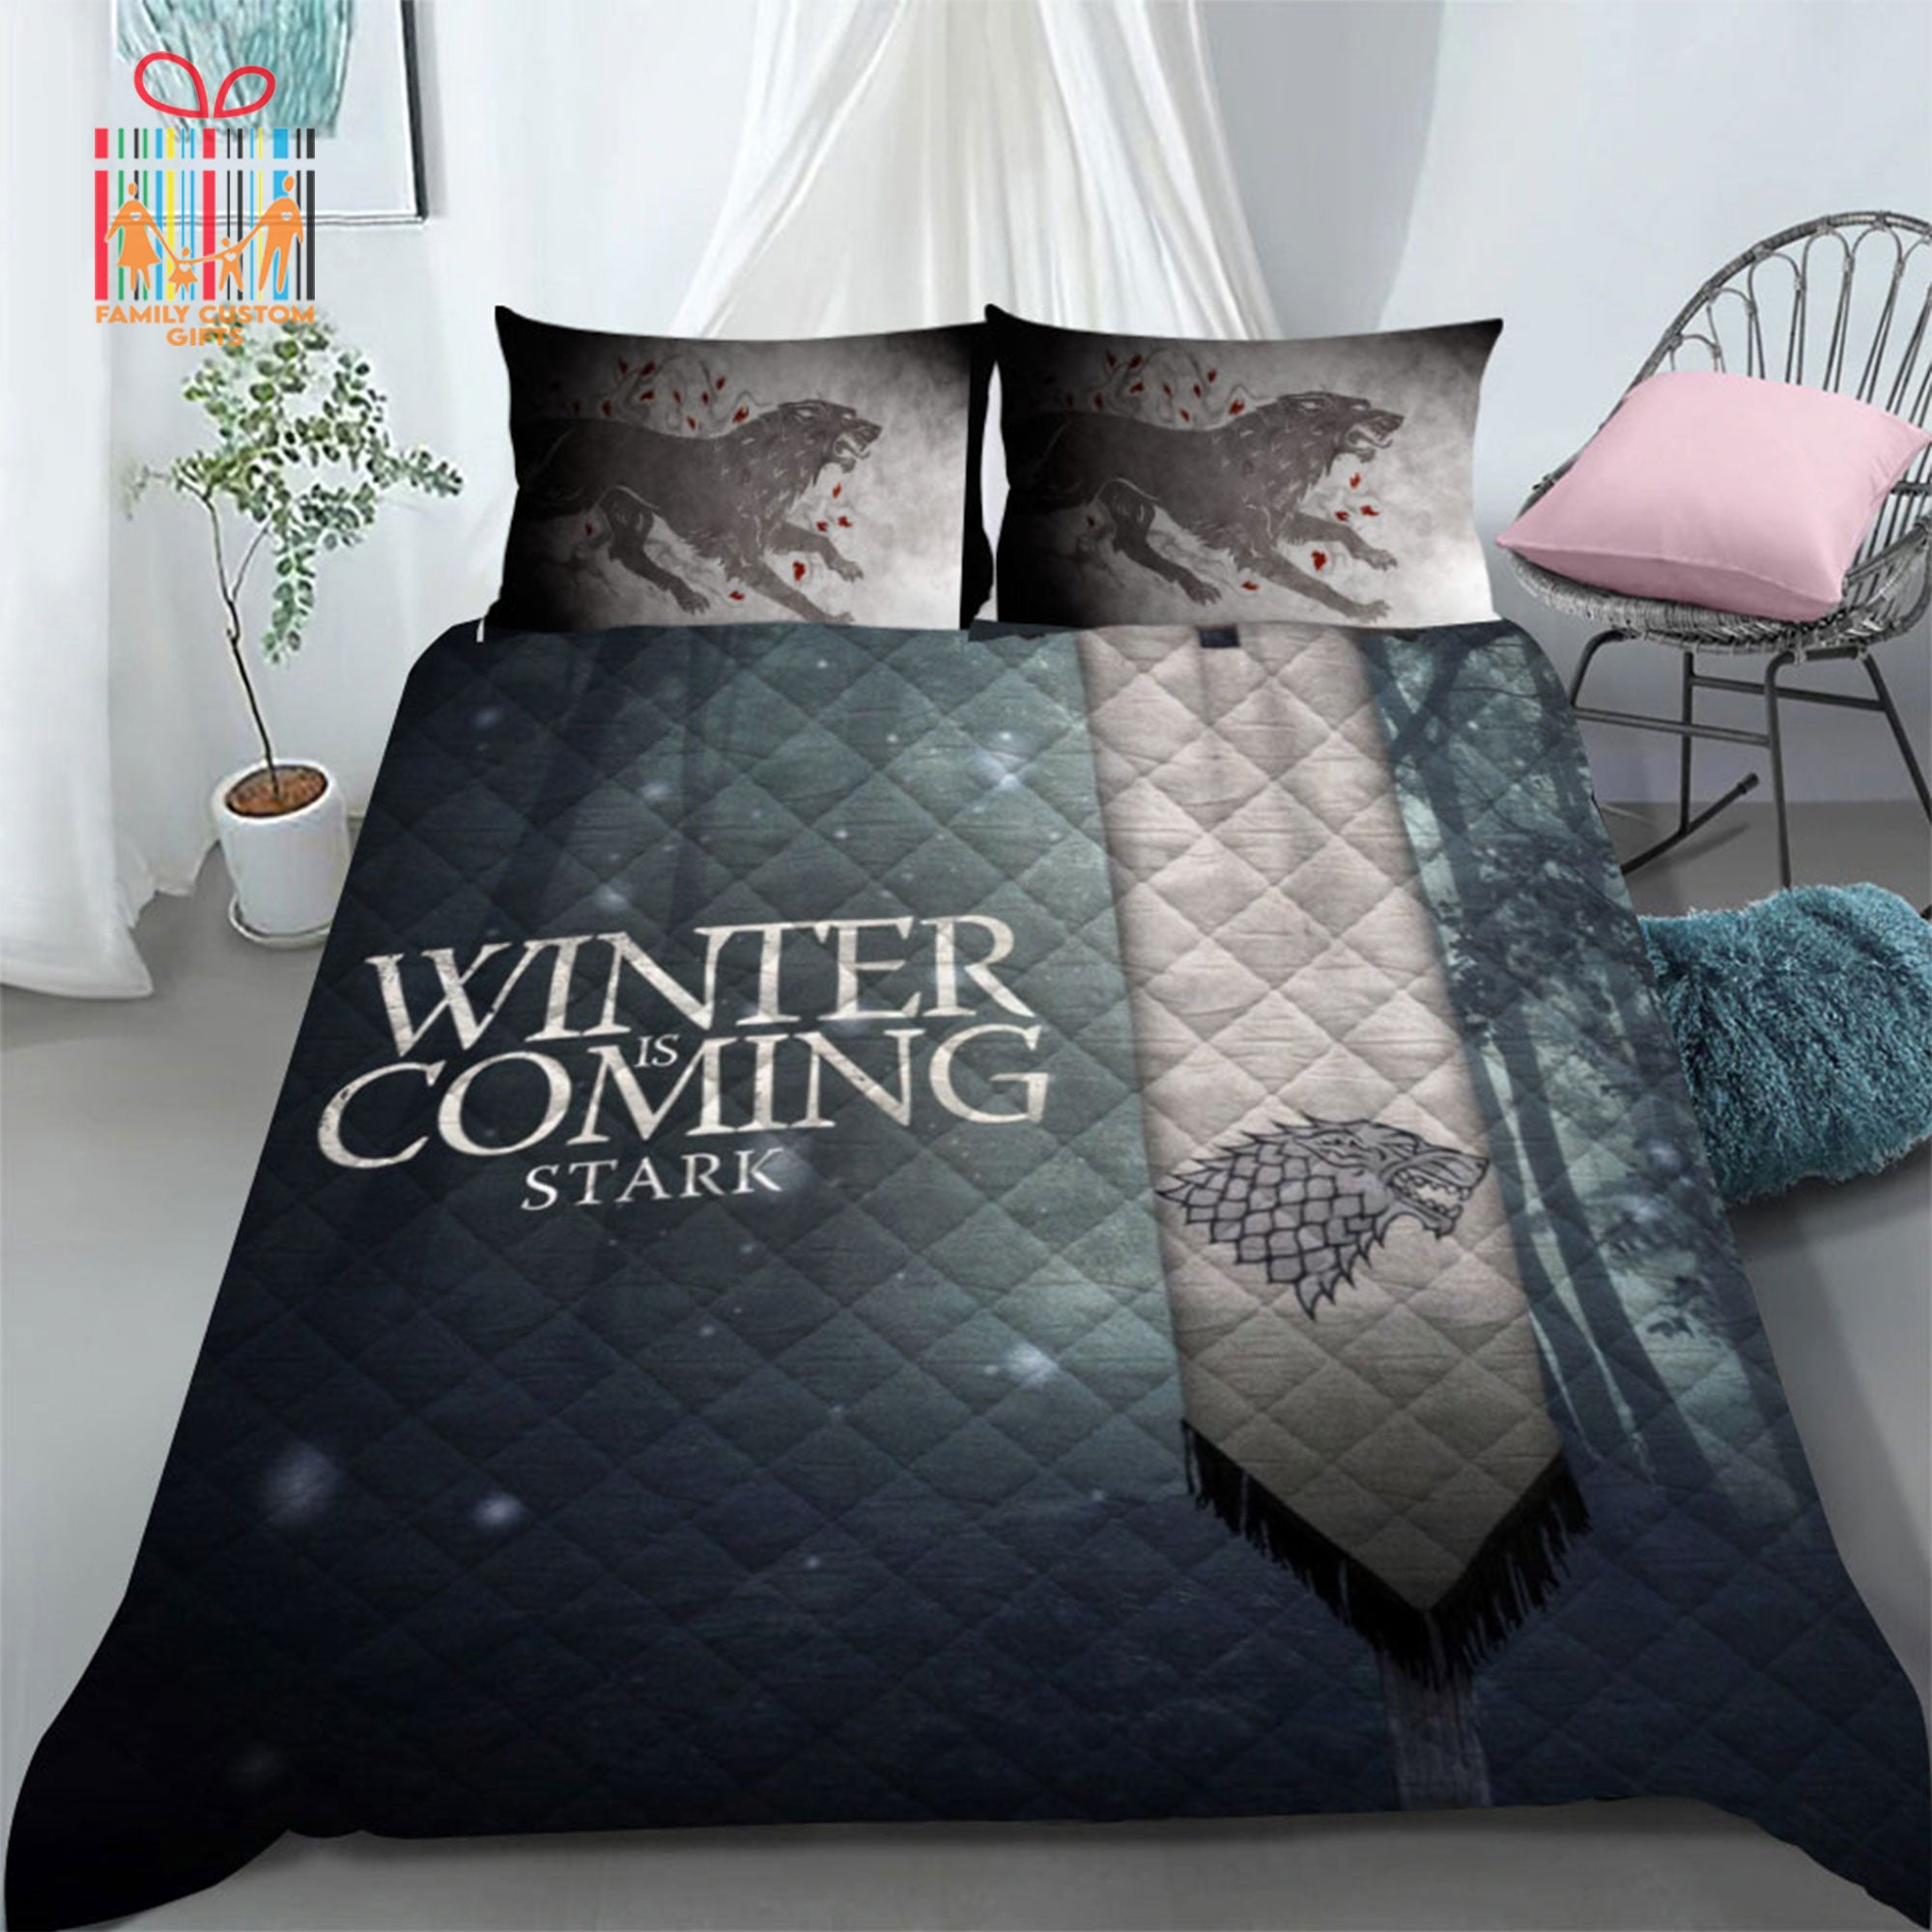 Custom Quilt Sets For Kids Teens Adult Game Of Thrones Winter Is Coming Personalized Quilt Bedding